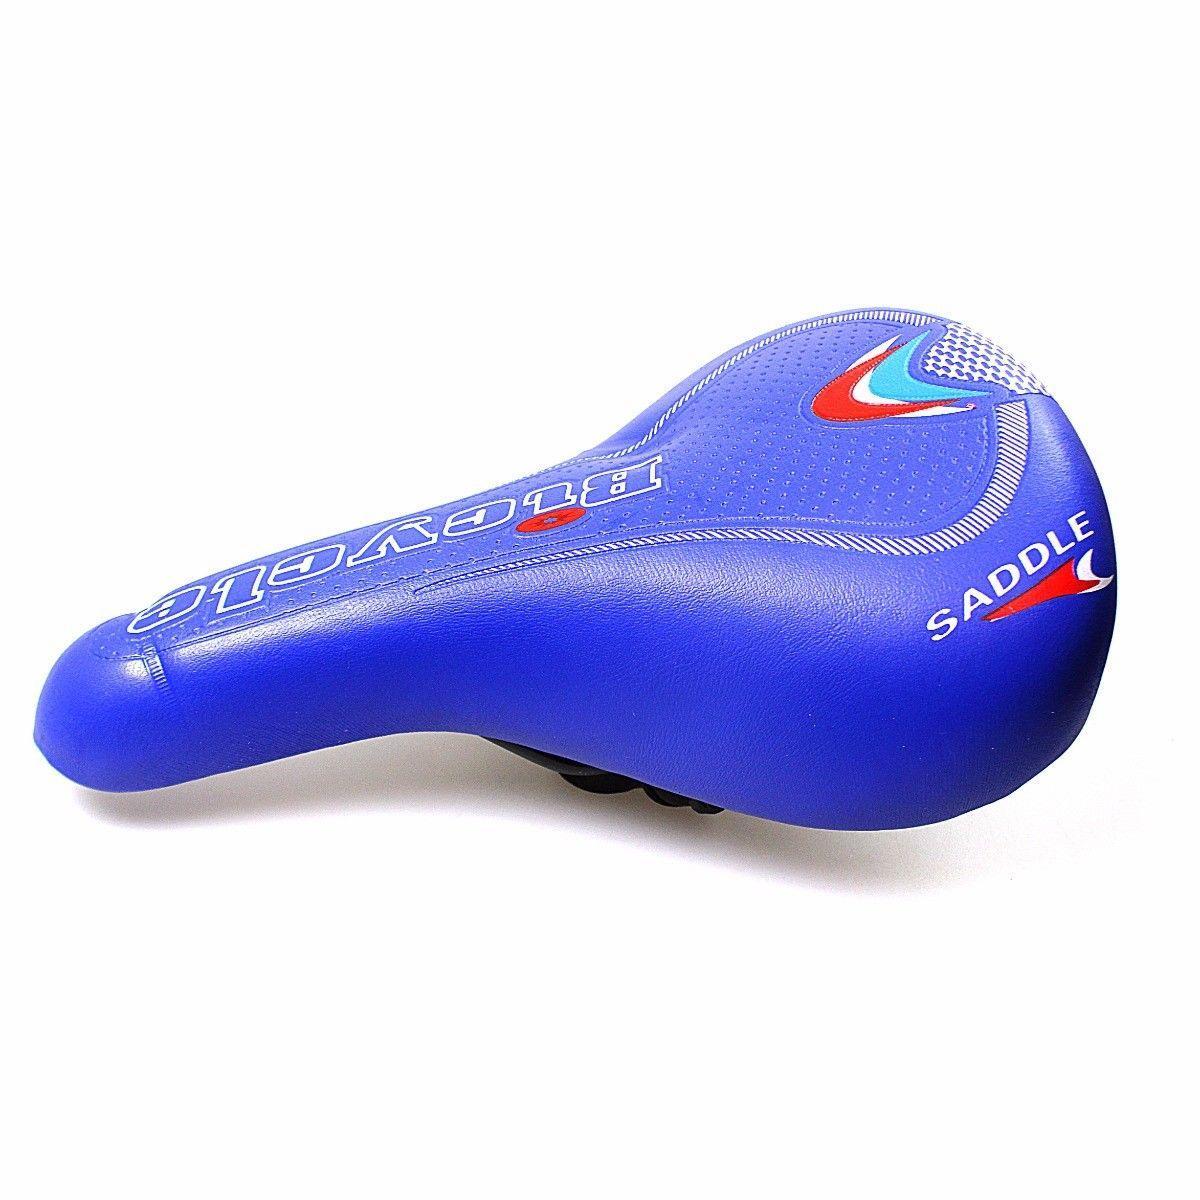 Bikers Bike Seat With Reflector Light Attached On Seat 1834 (Parcel Rate)